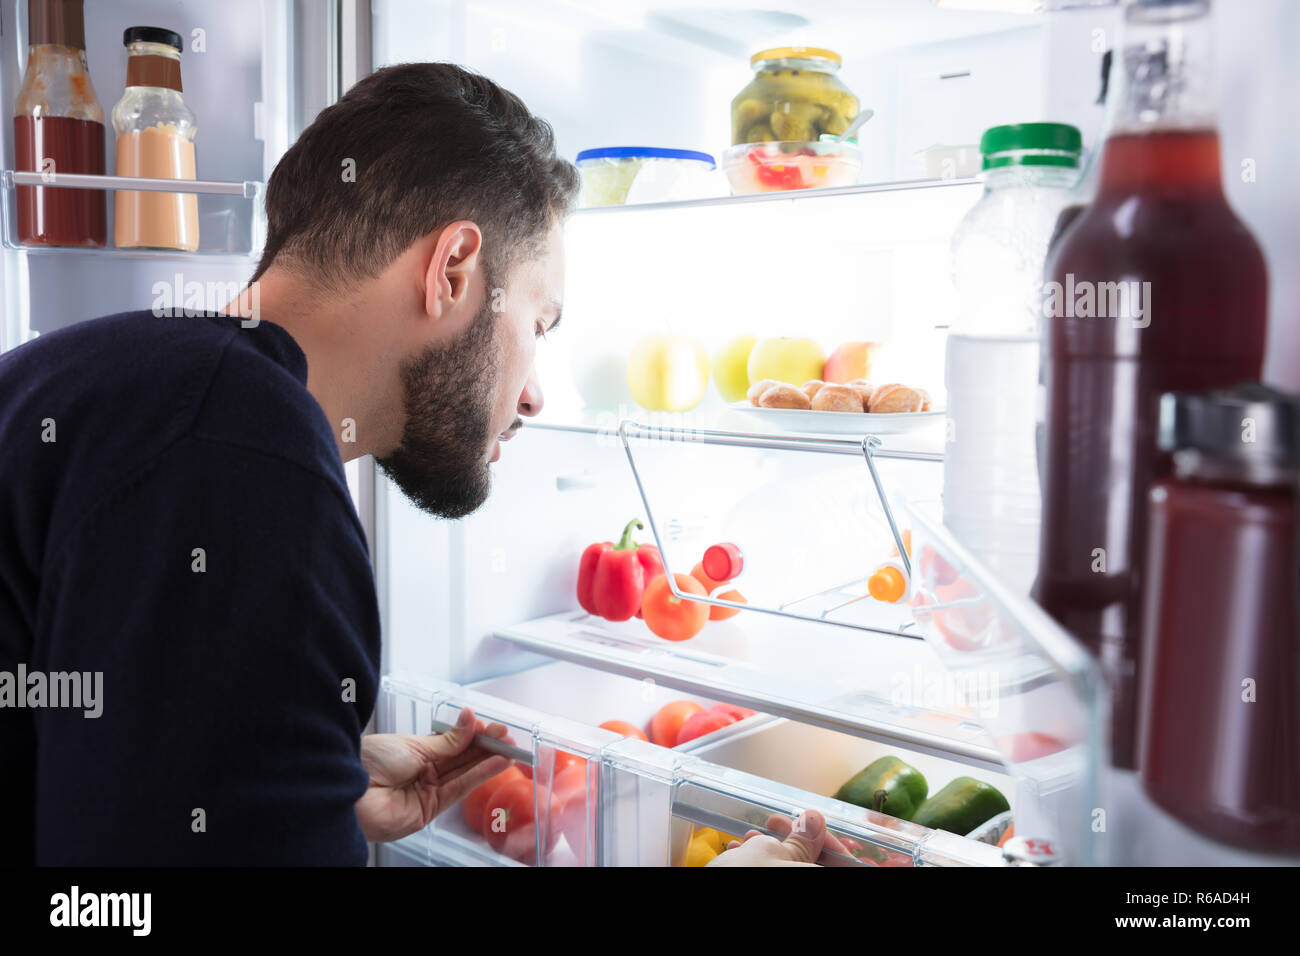 Man Looking At Vegetables In Refrigerator Stock Photo